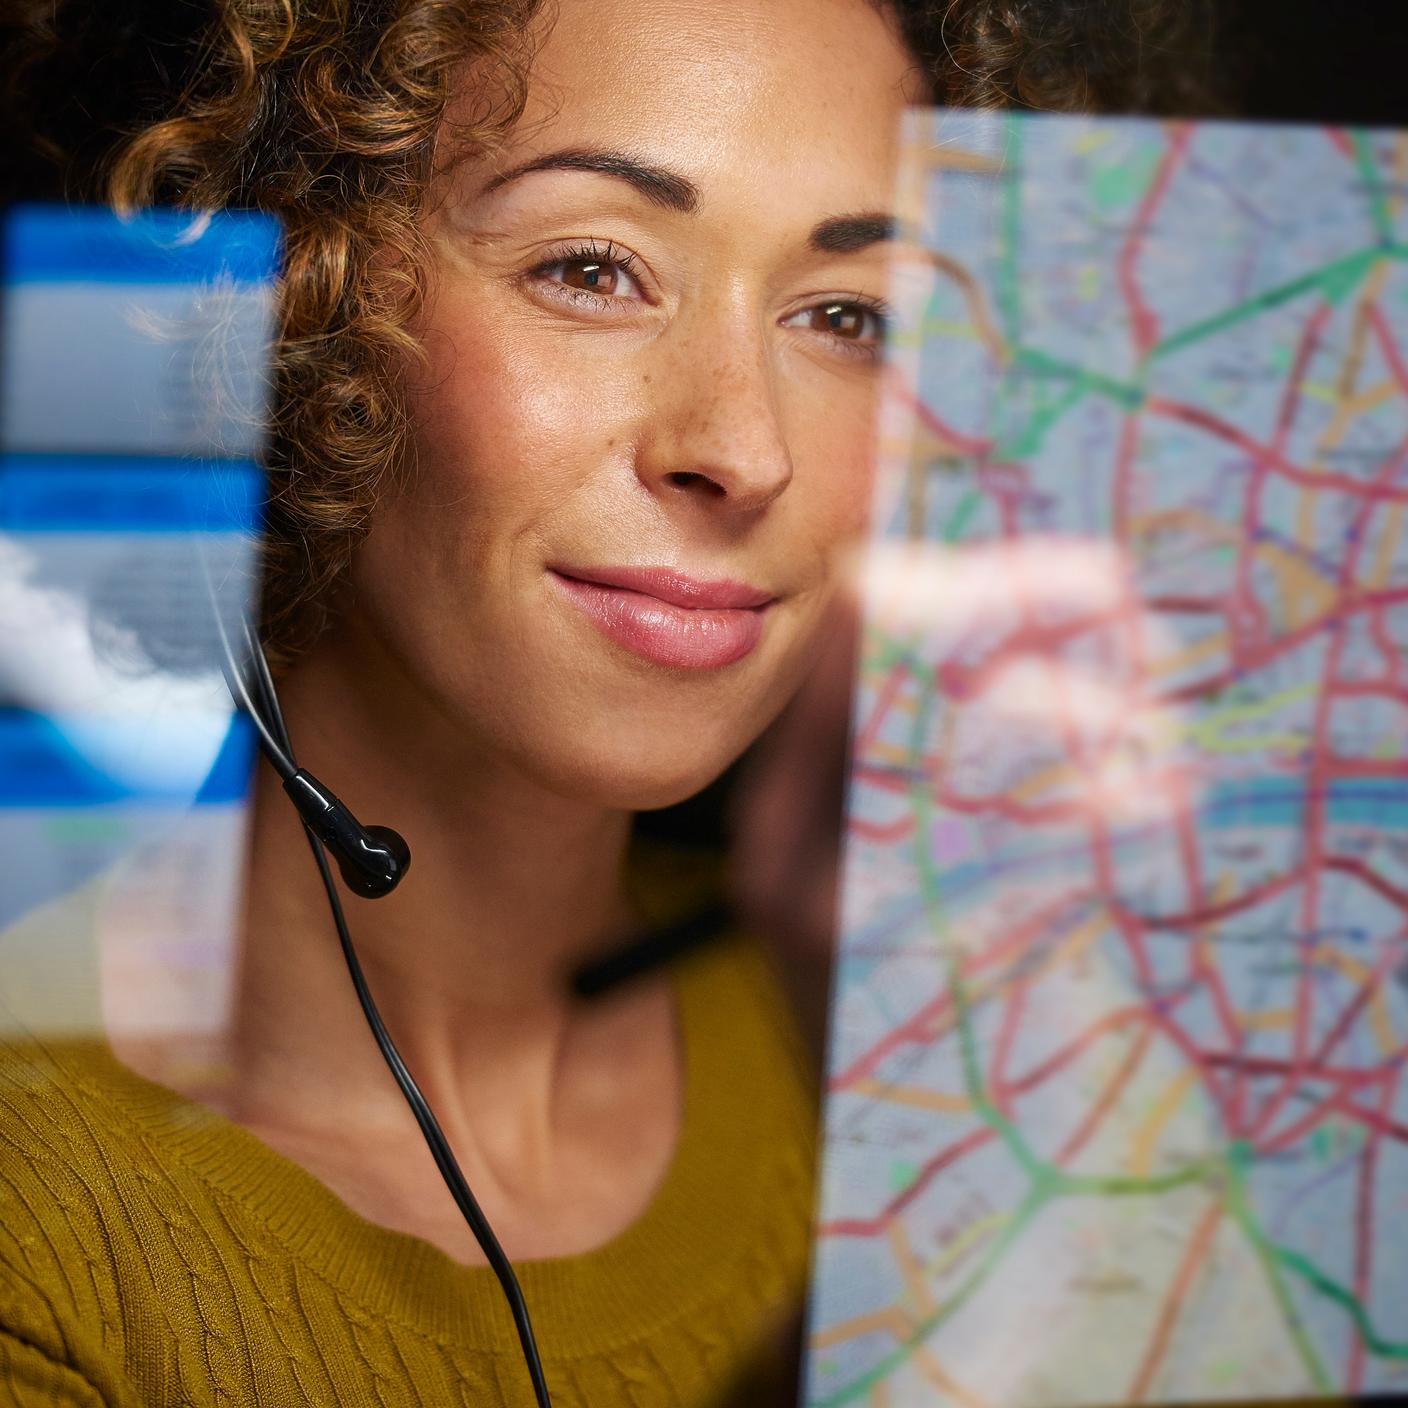 A female logistics worker is organising dispatch of freight on her interactive digital map whilst talking on her headset.